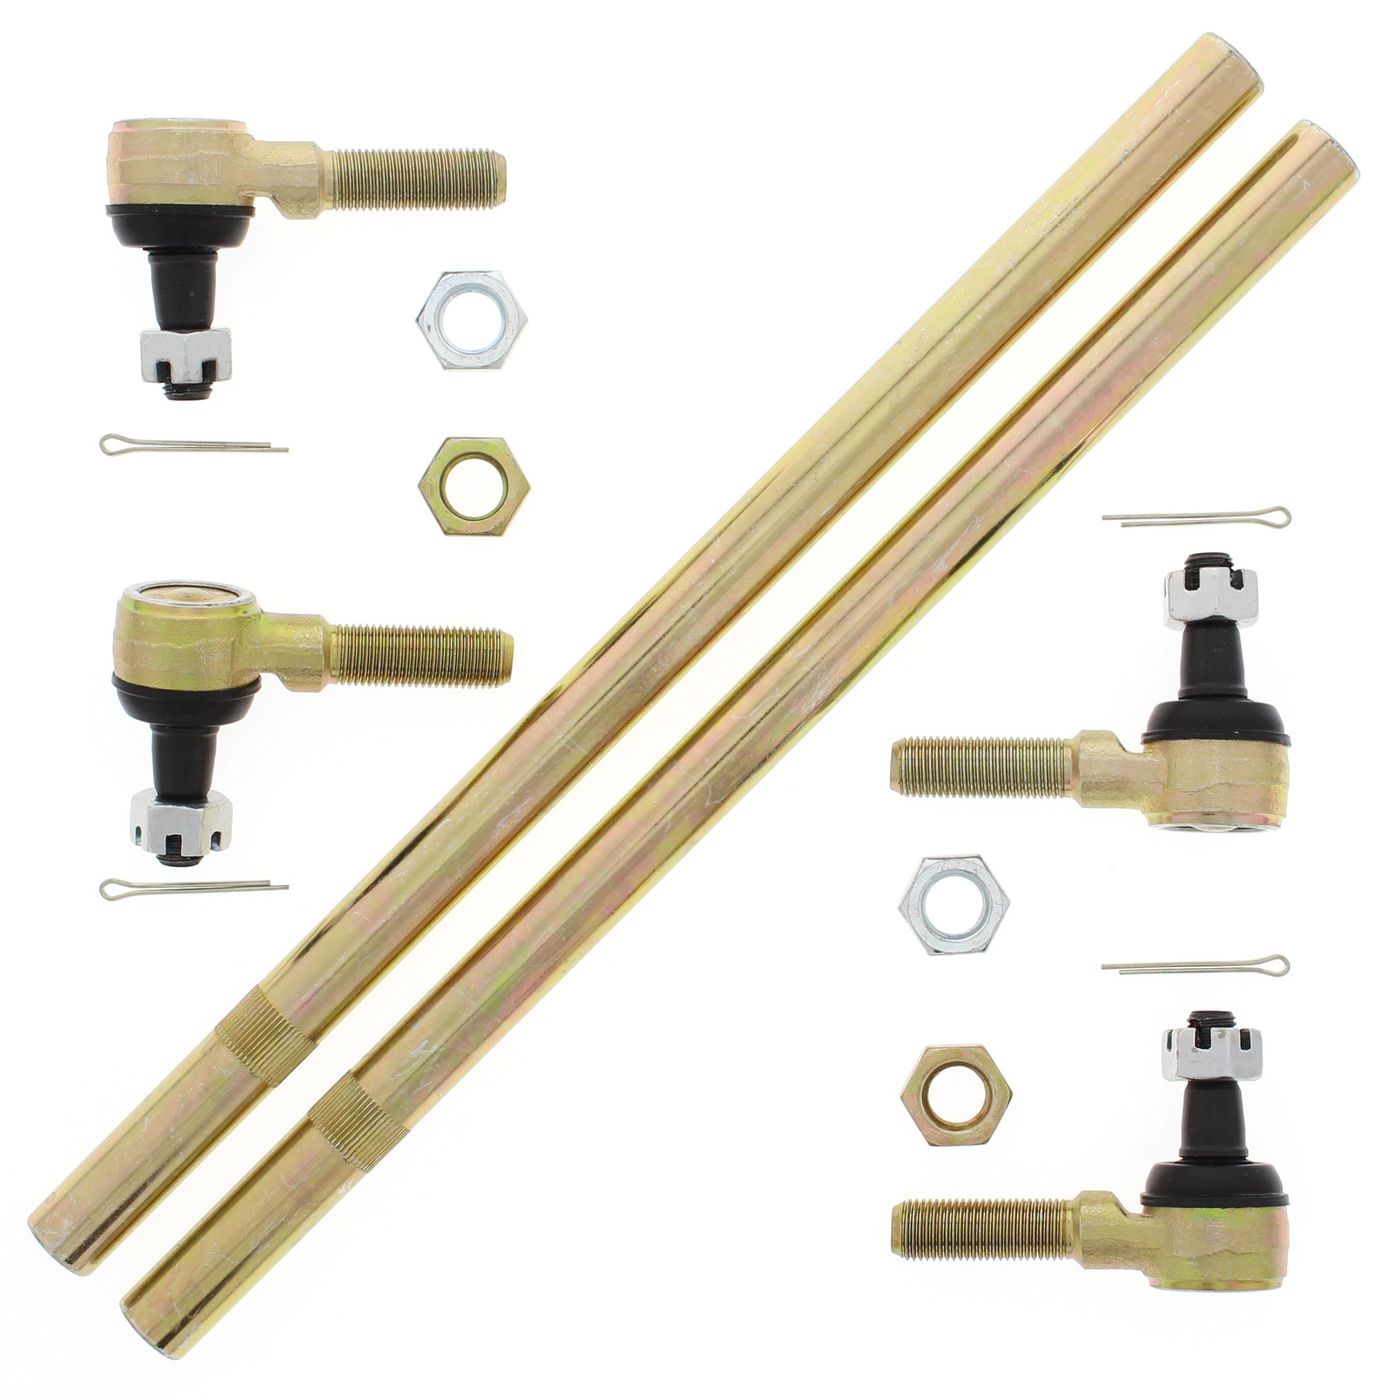 Wrp Tie Rod Kits - WRP521004 image